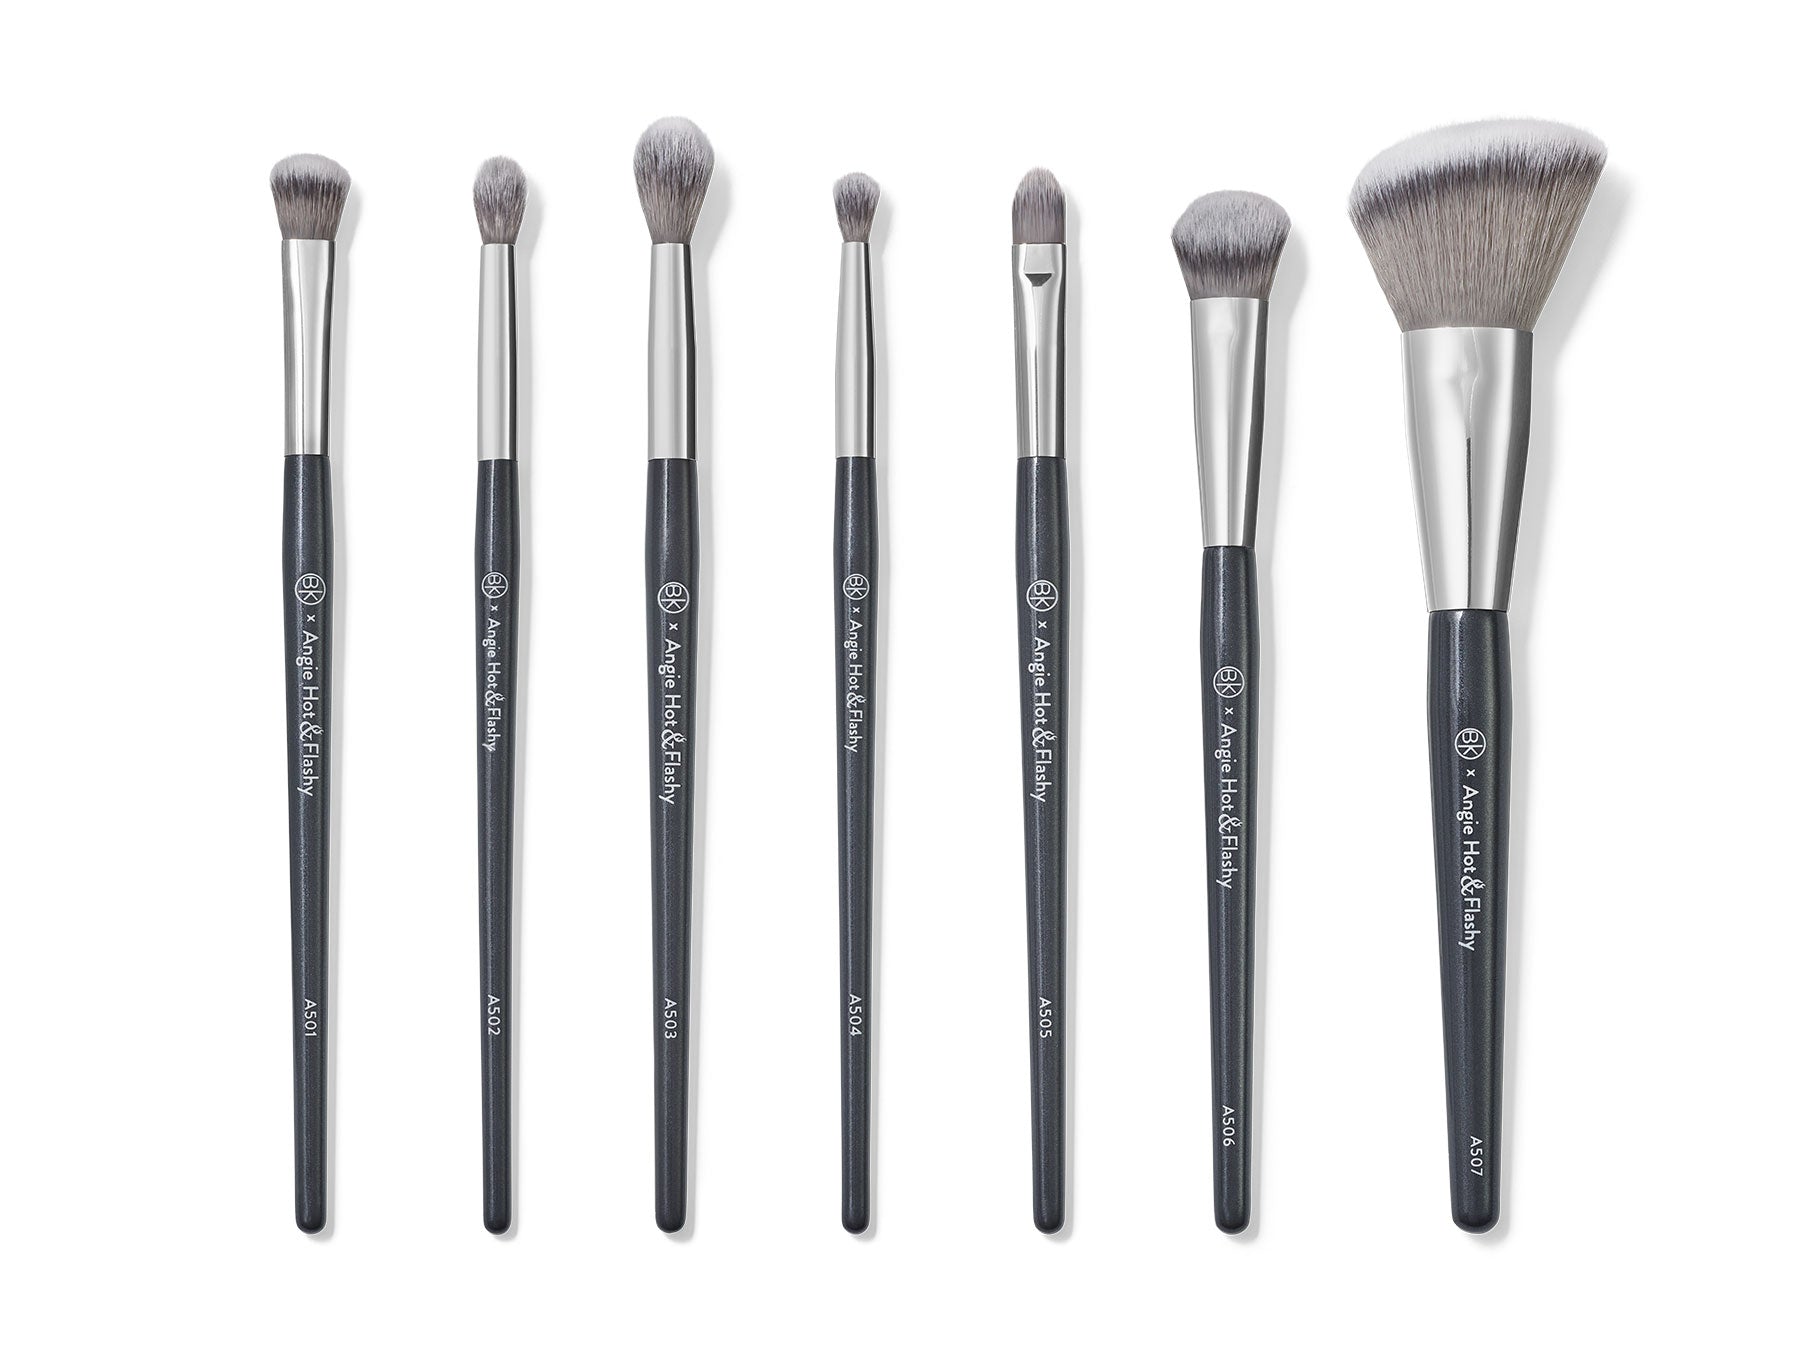 BK Beauty Travel Brush Set with Pouch